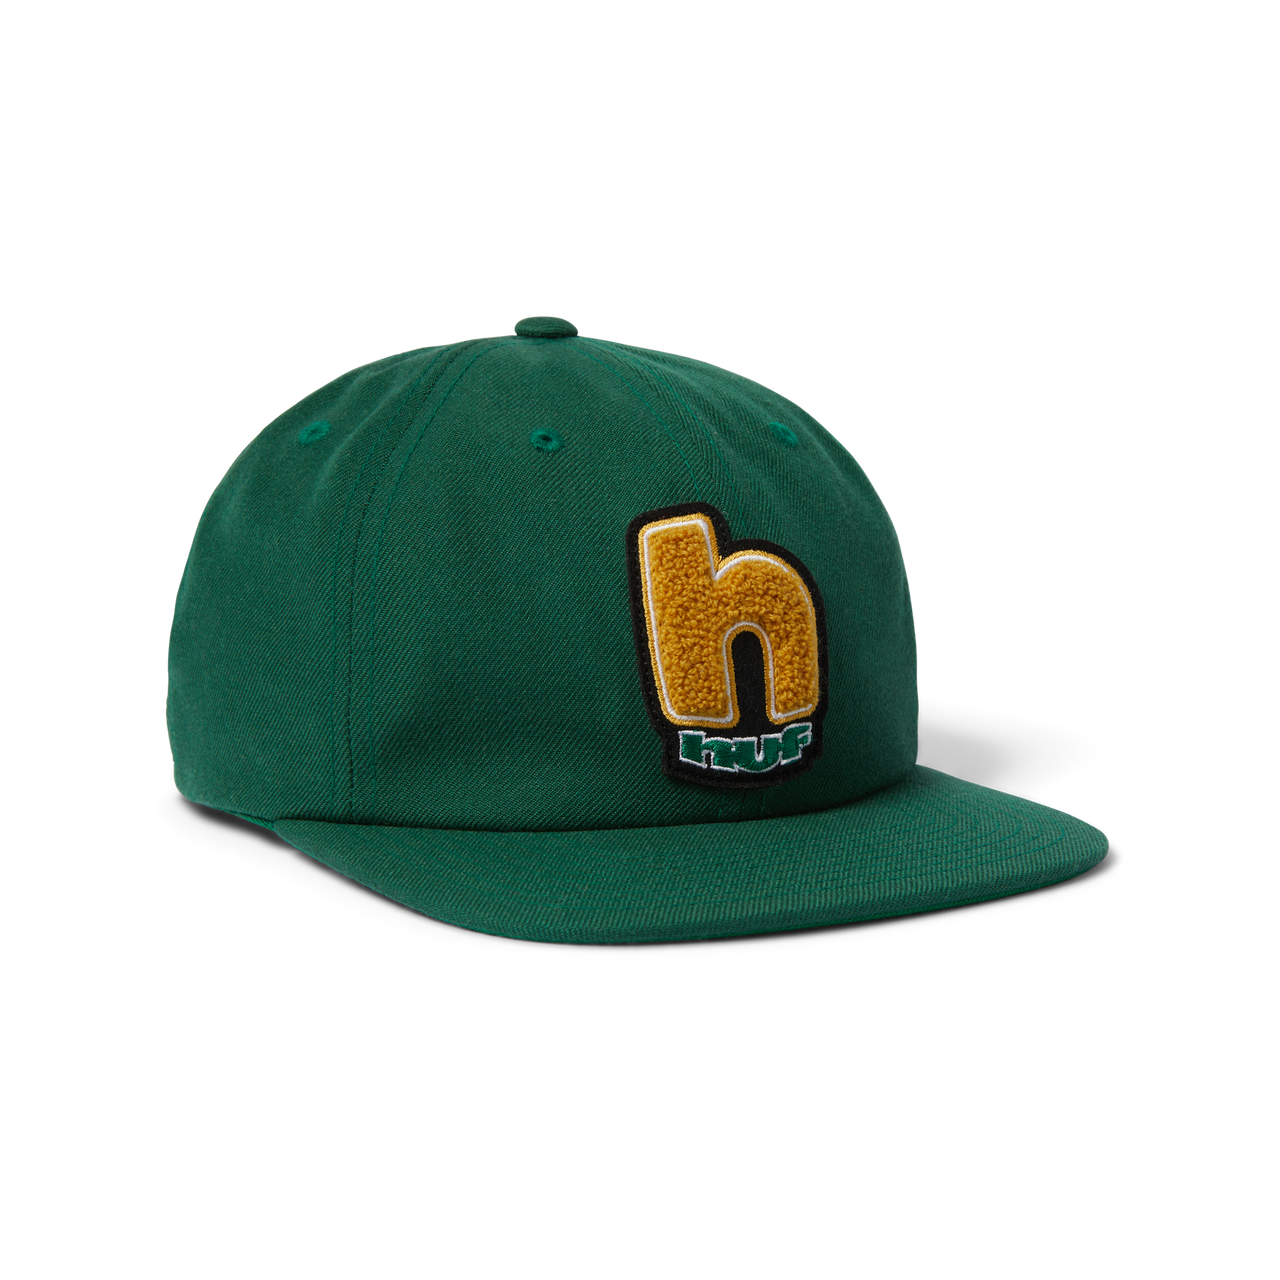 HUF - MOAB H 6 PANEL HAT - FOREST GREEN